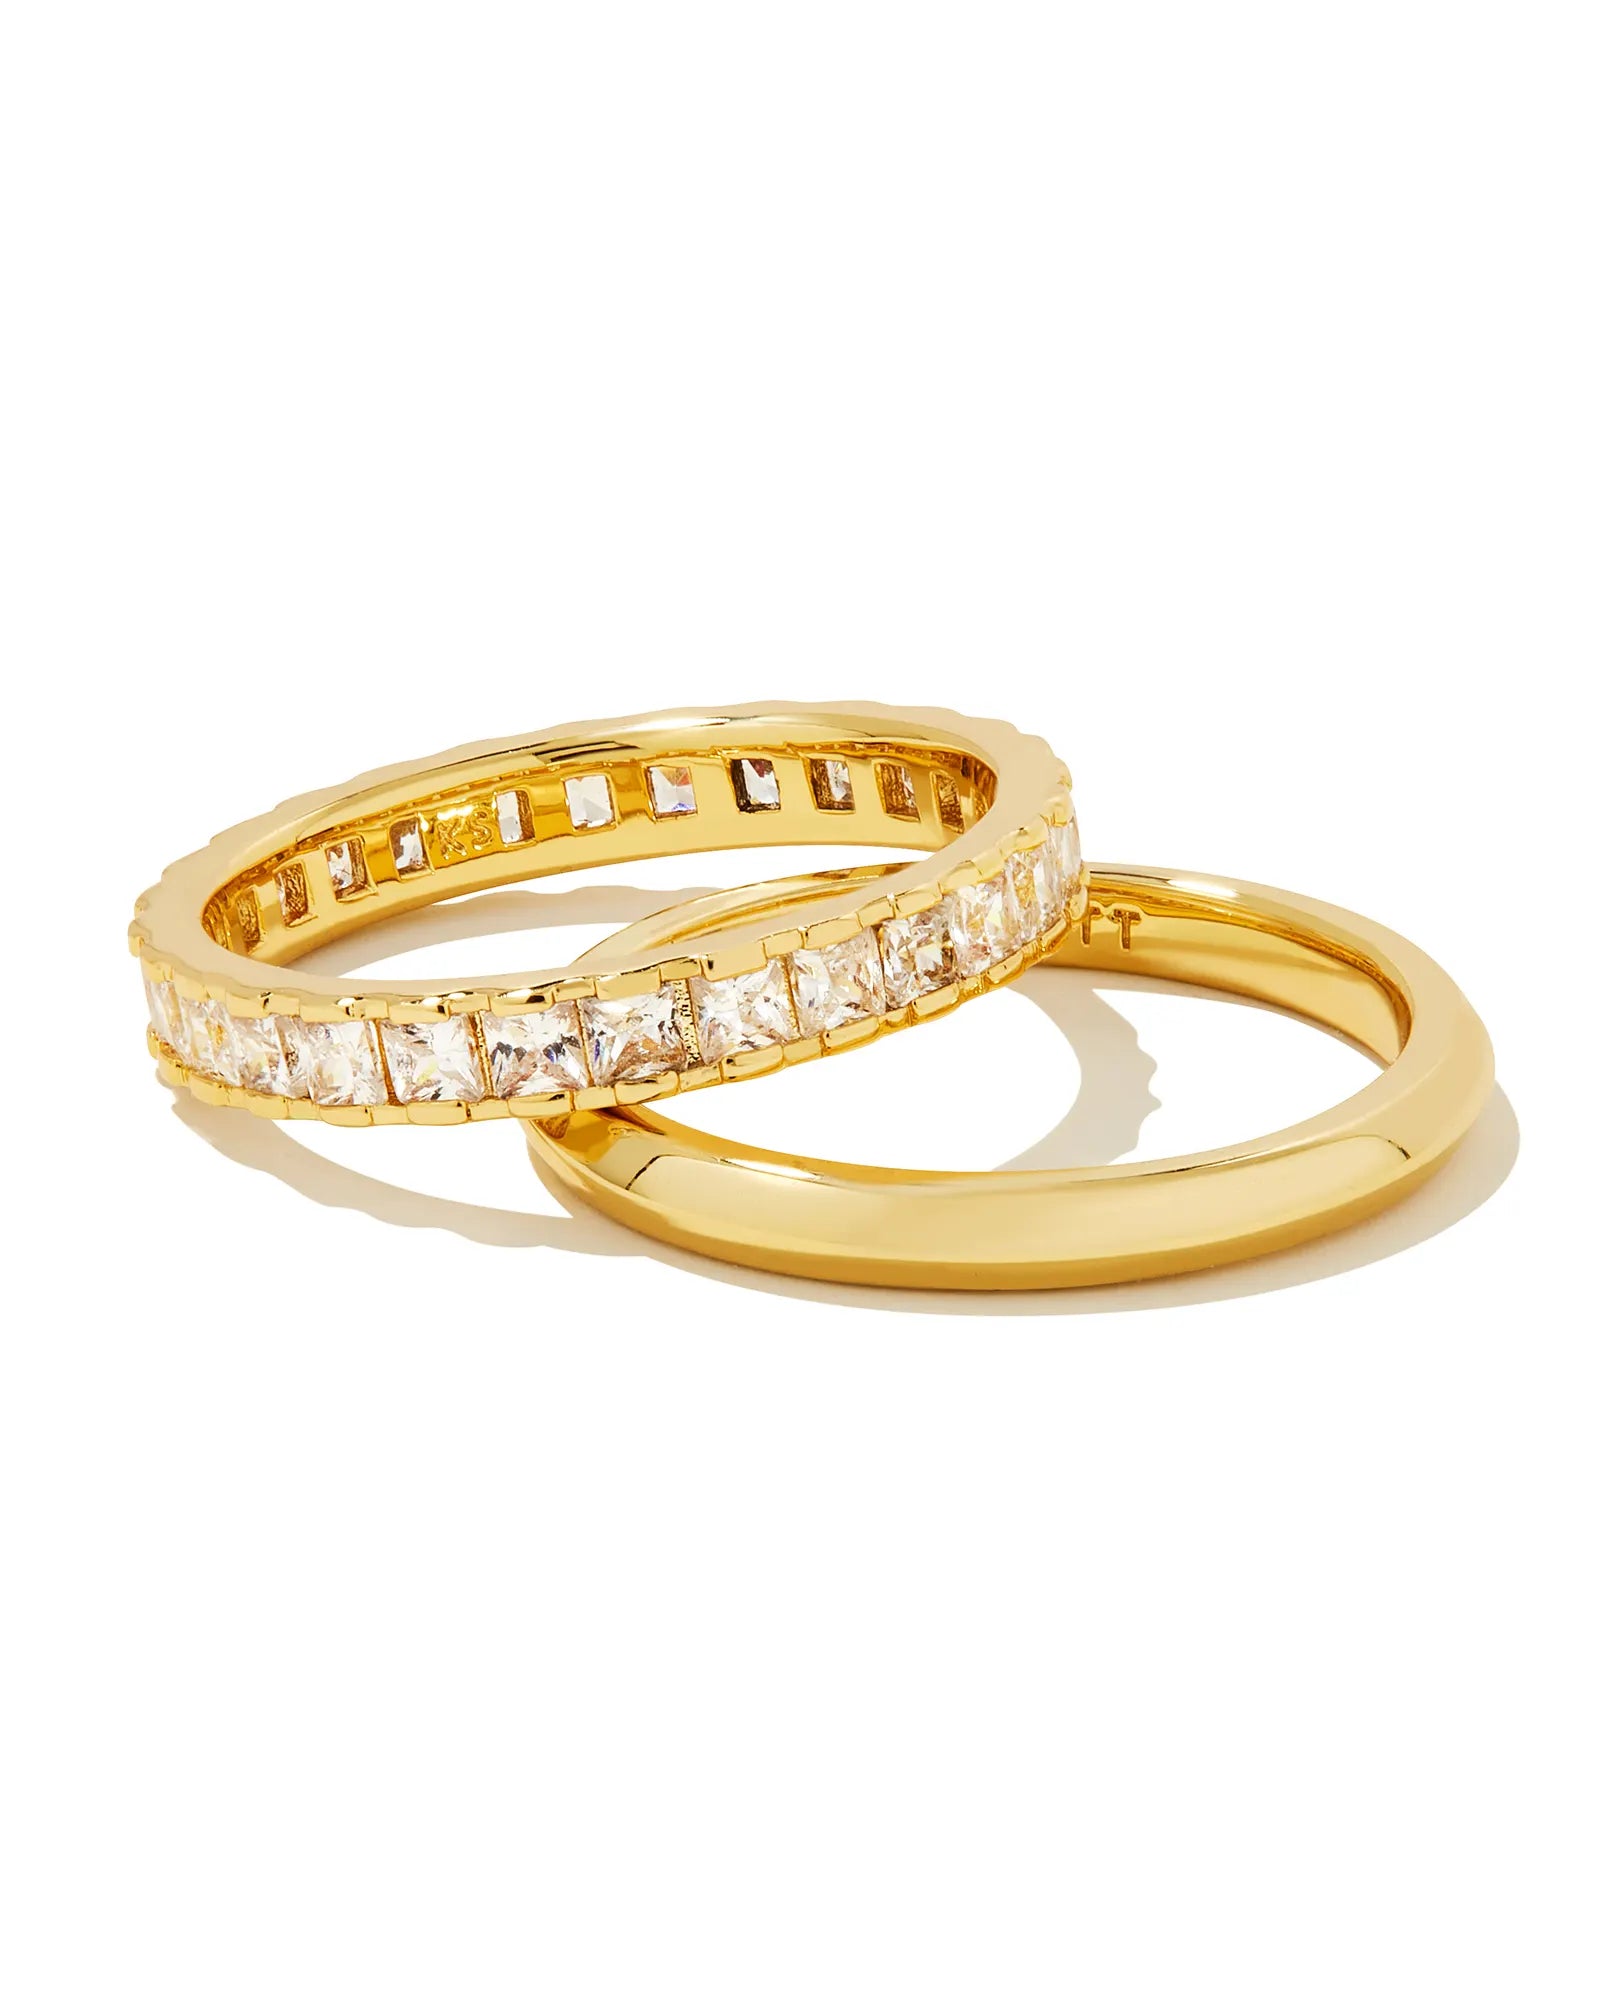 Kendra Scott: Finley Band Ring – The Vogue Boutique